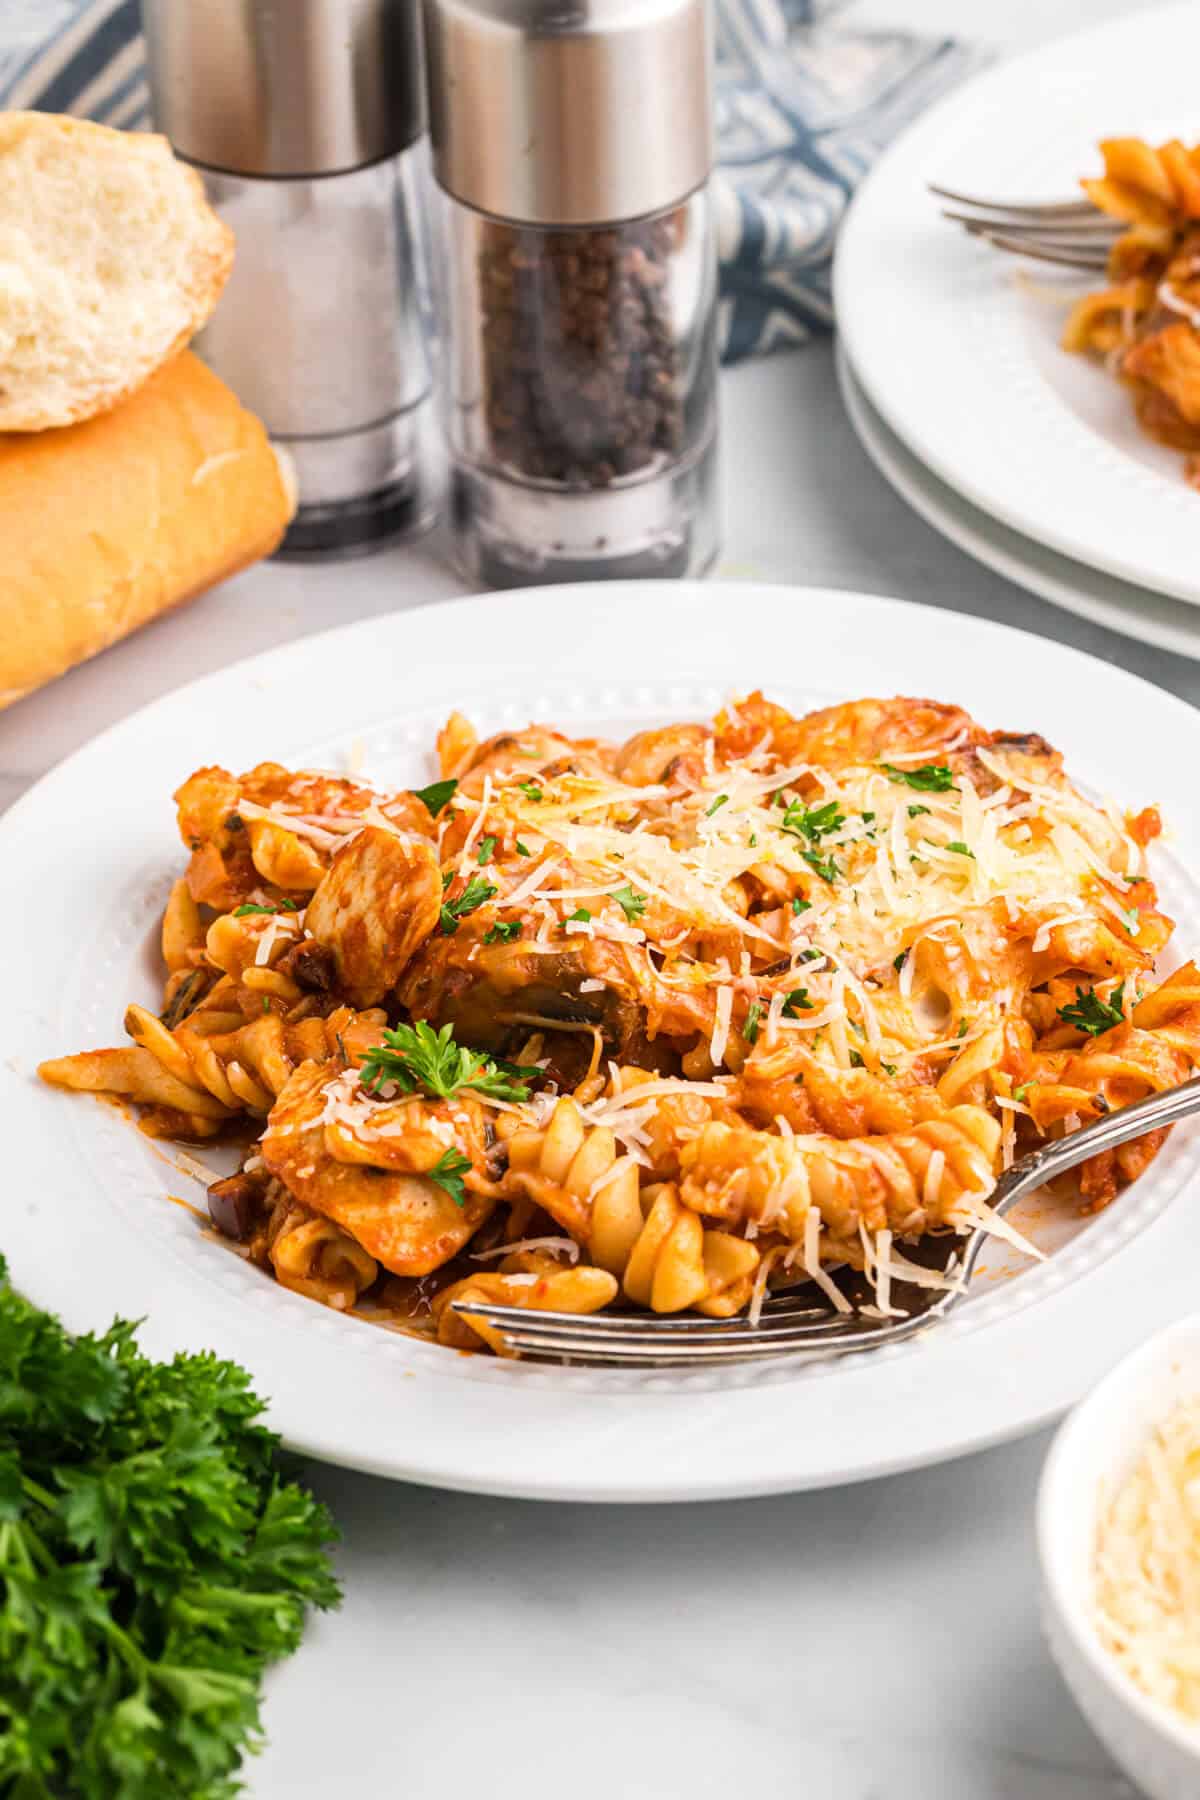 Baked chicken and tarragon pasta served on a plate.